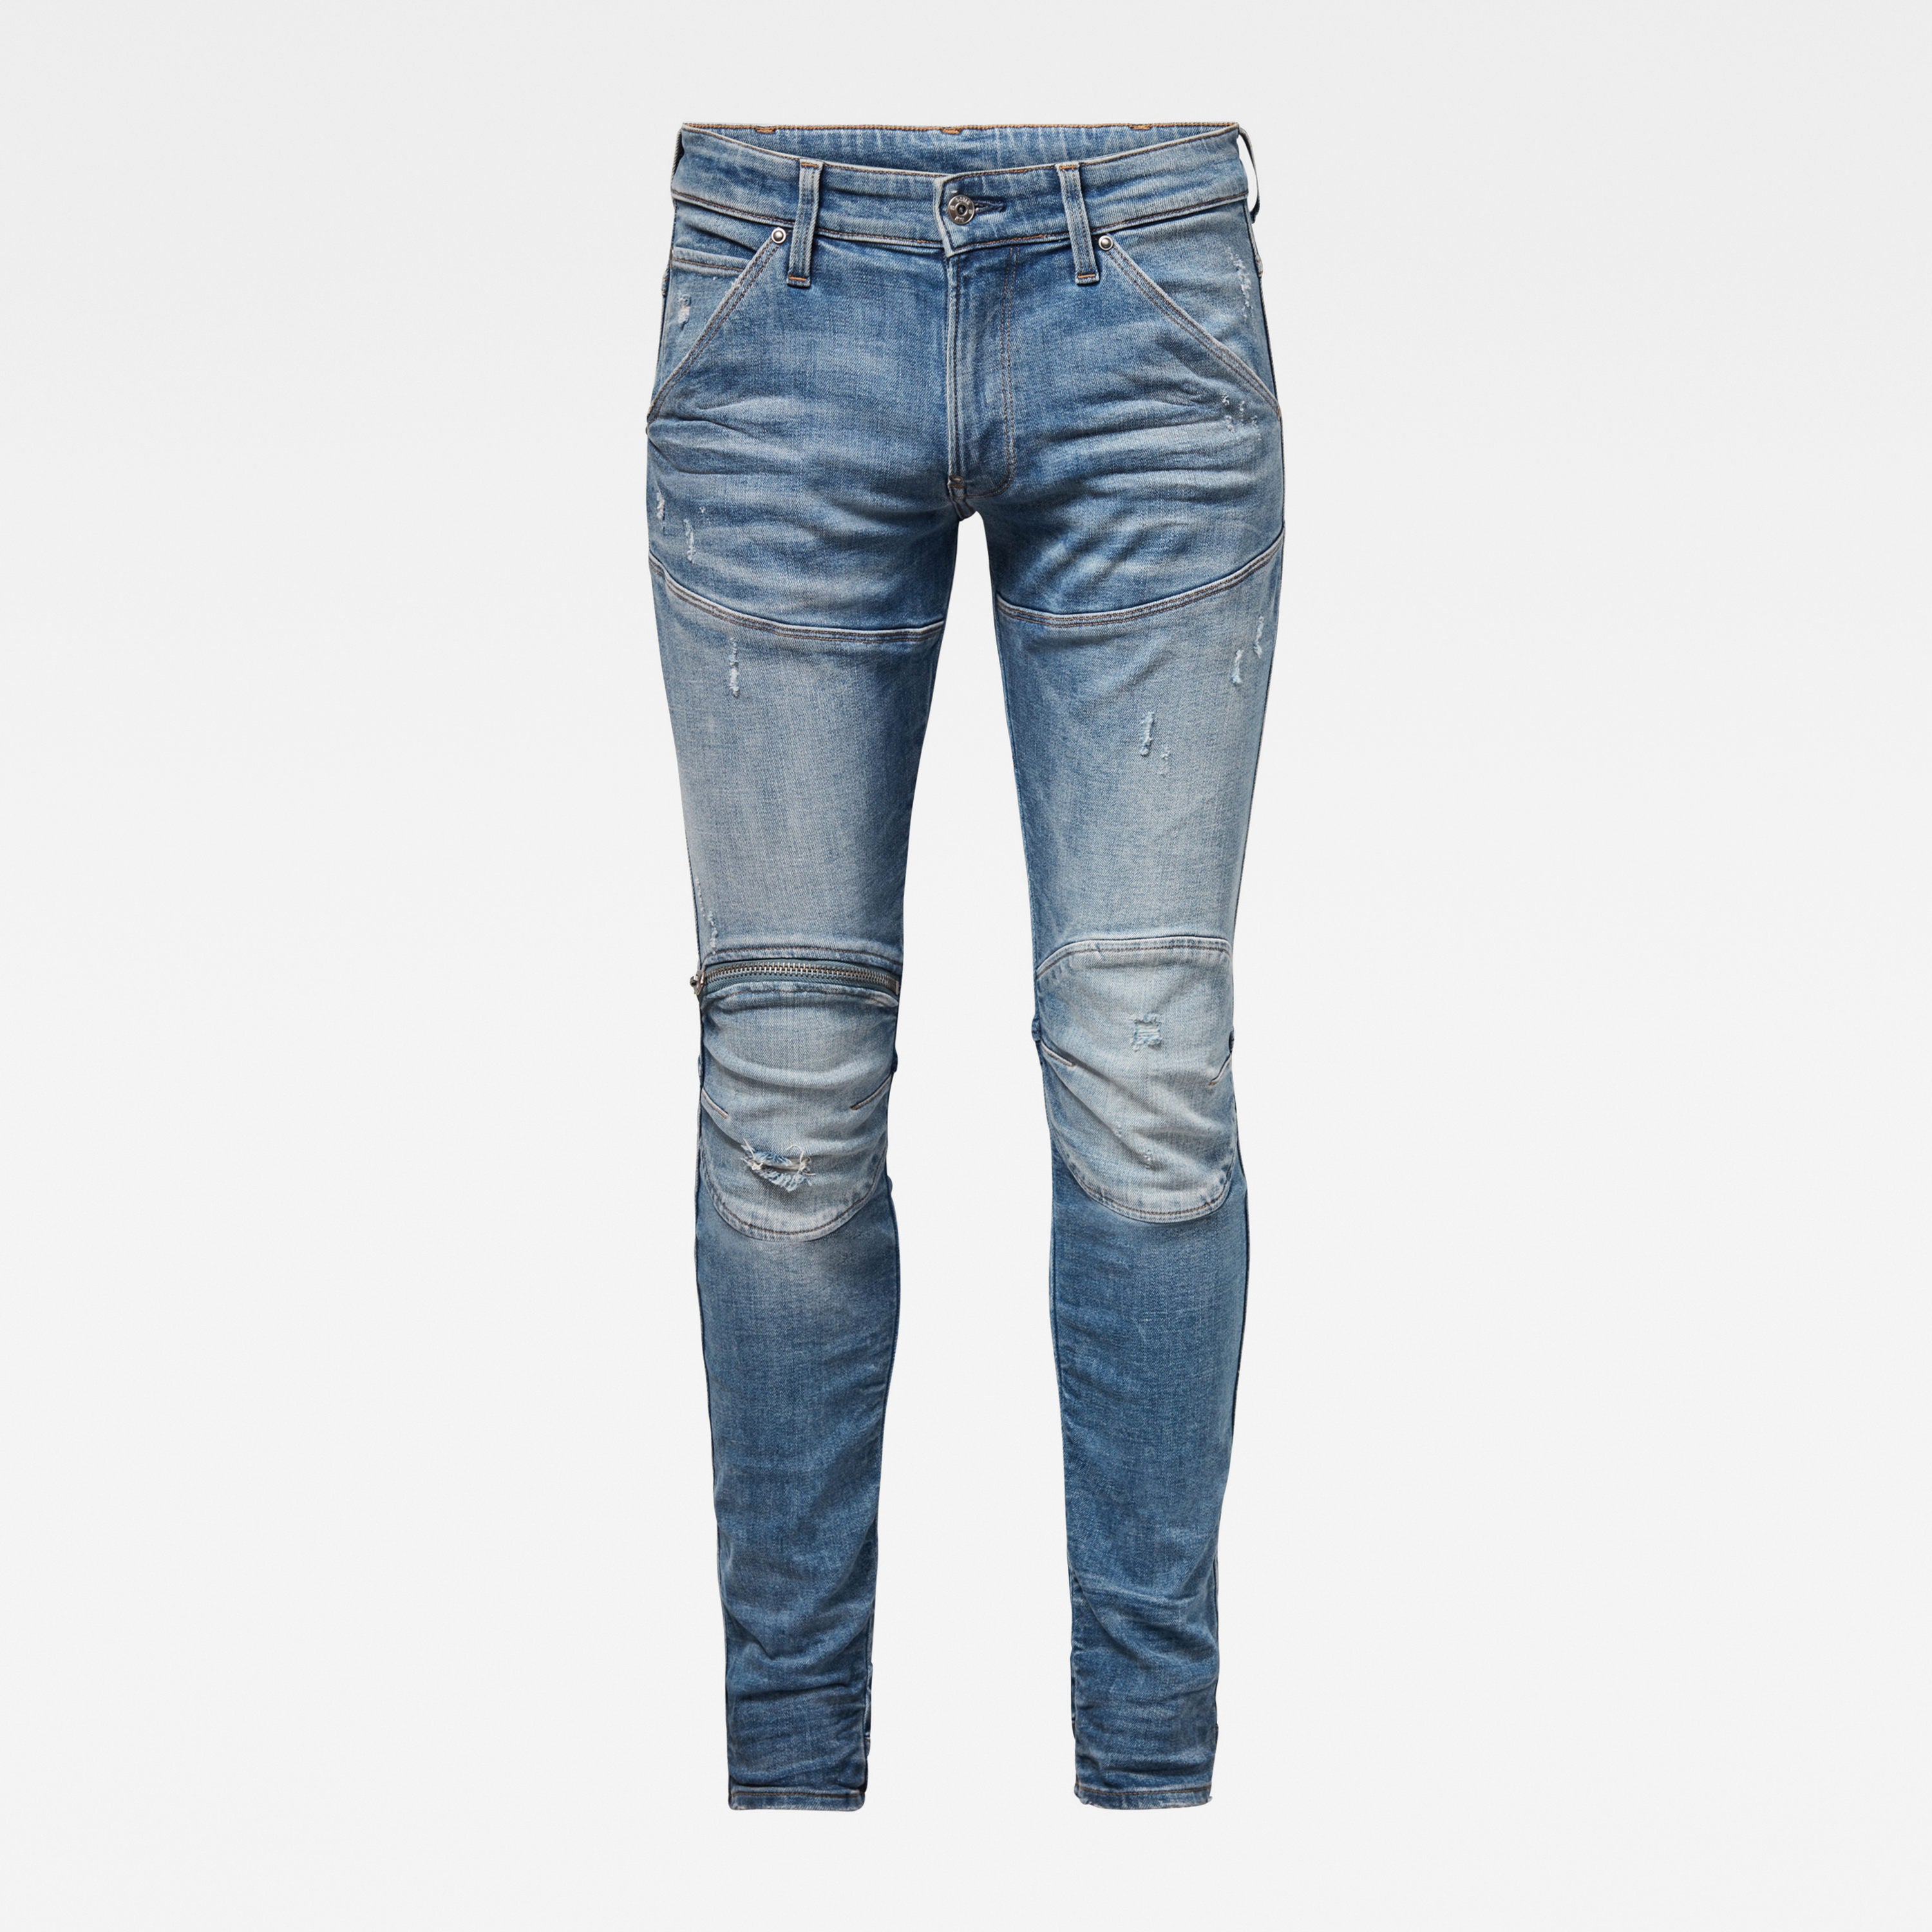 Buy Being Human Blue Slim Fit Jeans for Mens Online @ Tata CLiQ